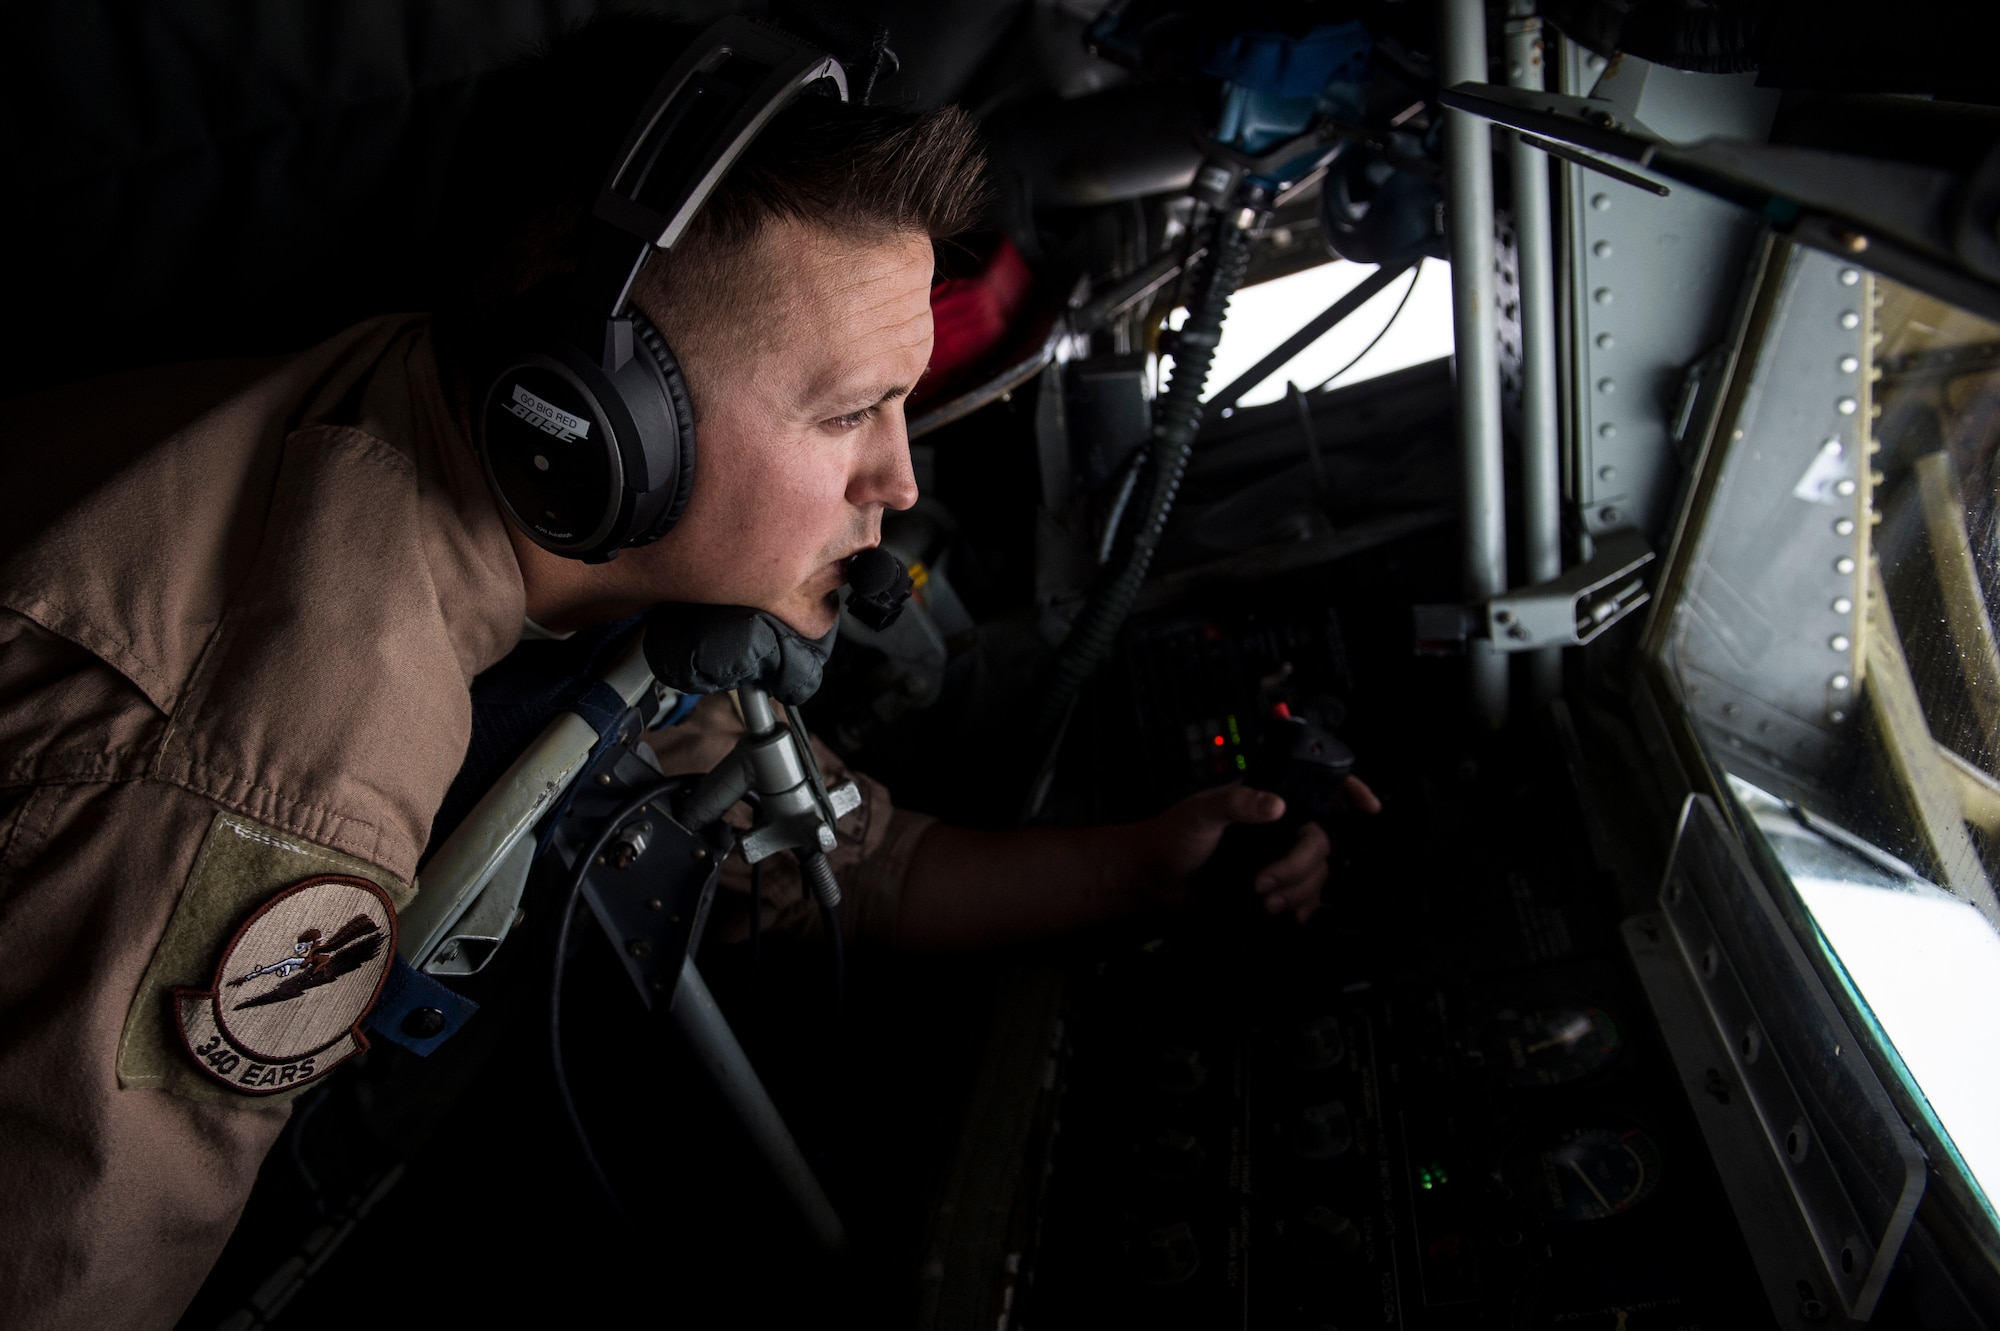 U.S. Air Force Tech Sgt. Matthew Prosser operates the boom of a KC-135 Stratotanker over Iraq in support of Operation Inherent Resolve, April 8, 2016. Prosser is a boom operator deployed out of the 185th Air Refueling Wing, Iowa Air National Guard. OIR is the coalition intervention against the Islamic State of Iraq and the Levant. (U.S. Air Force photo by Staff Sgt. Corey Hook/Released)